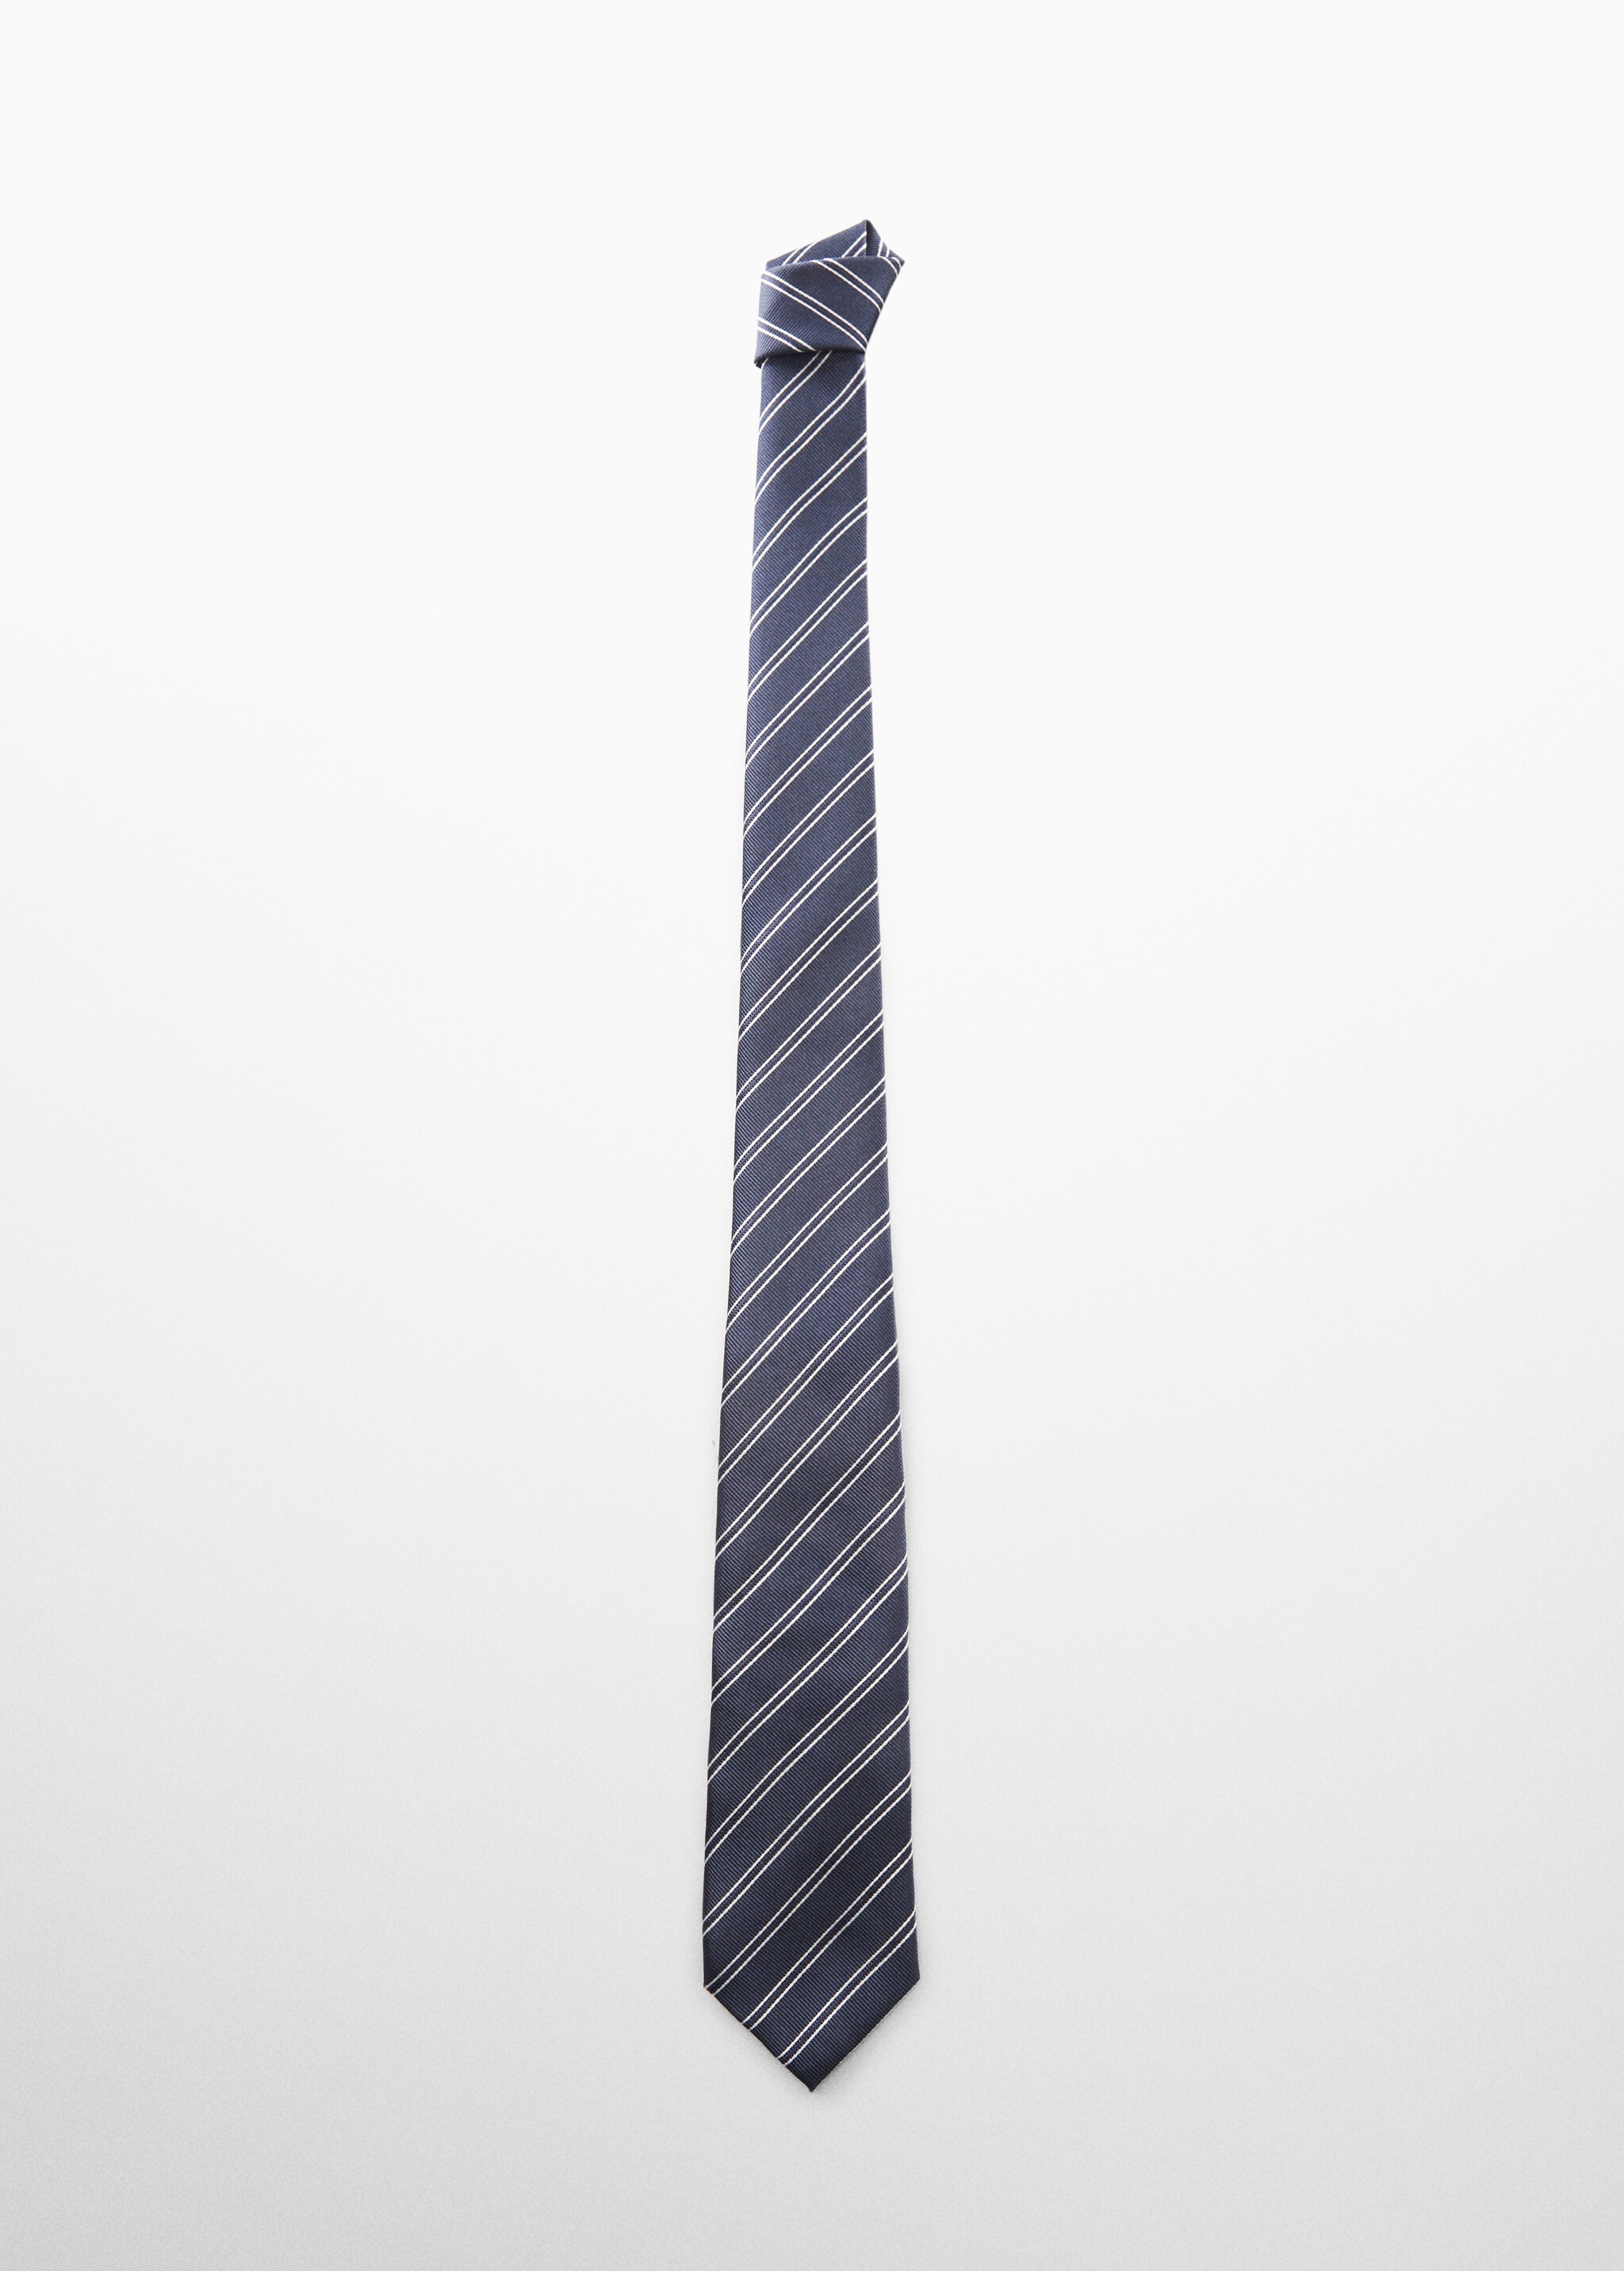 Stain-resistant striped tie - Article without model